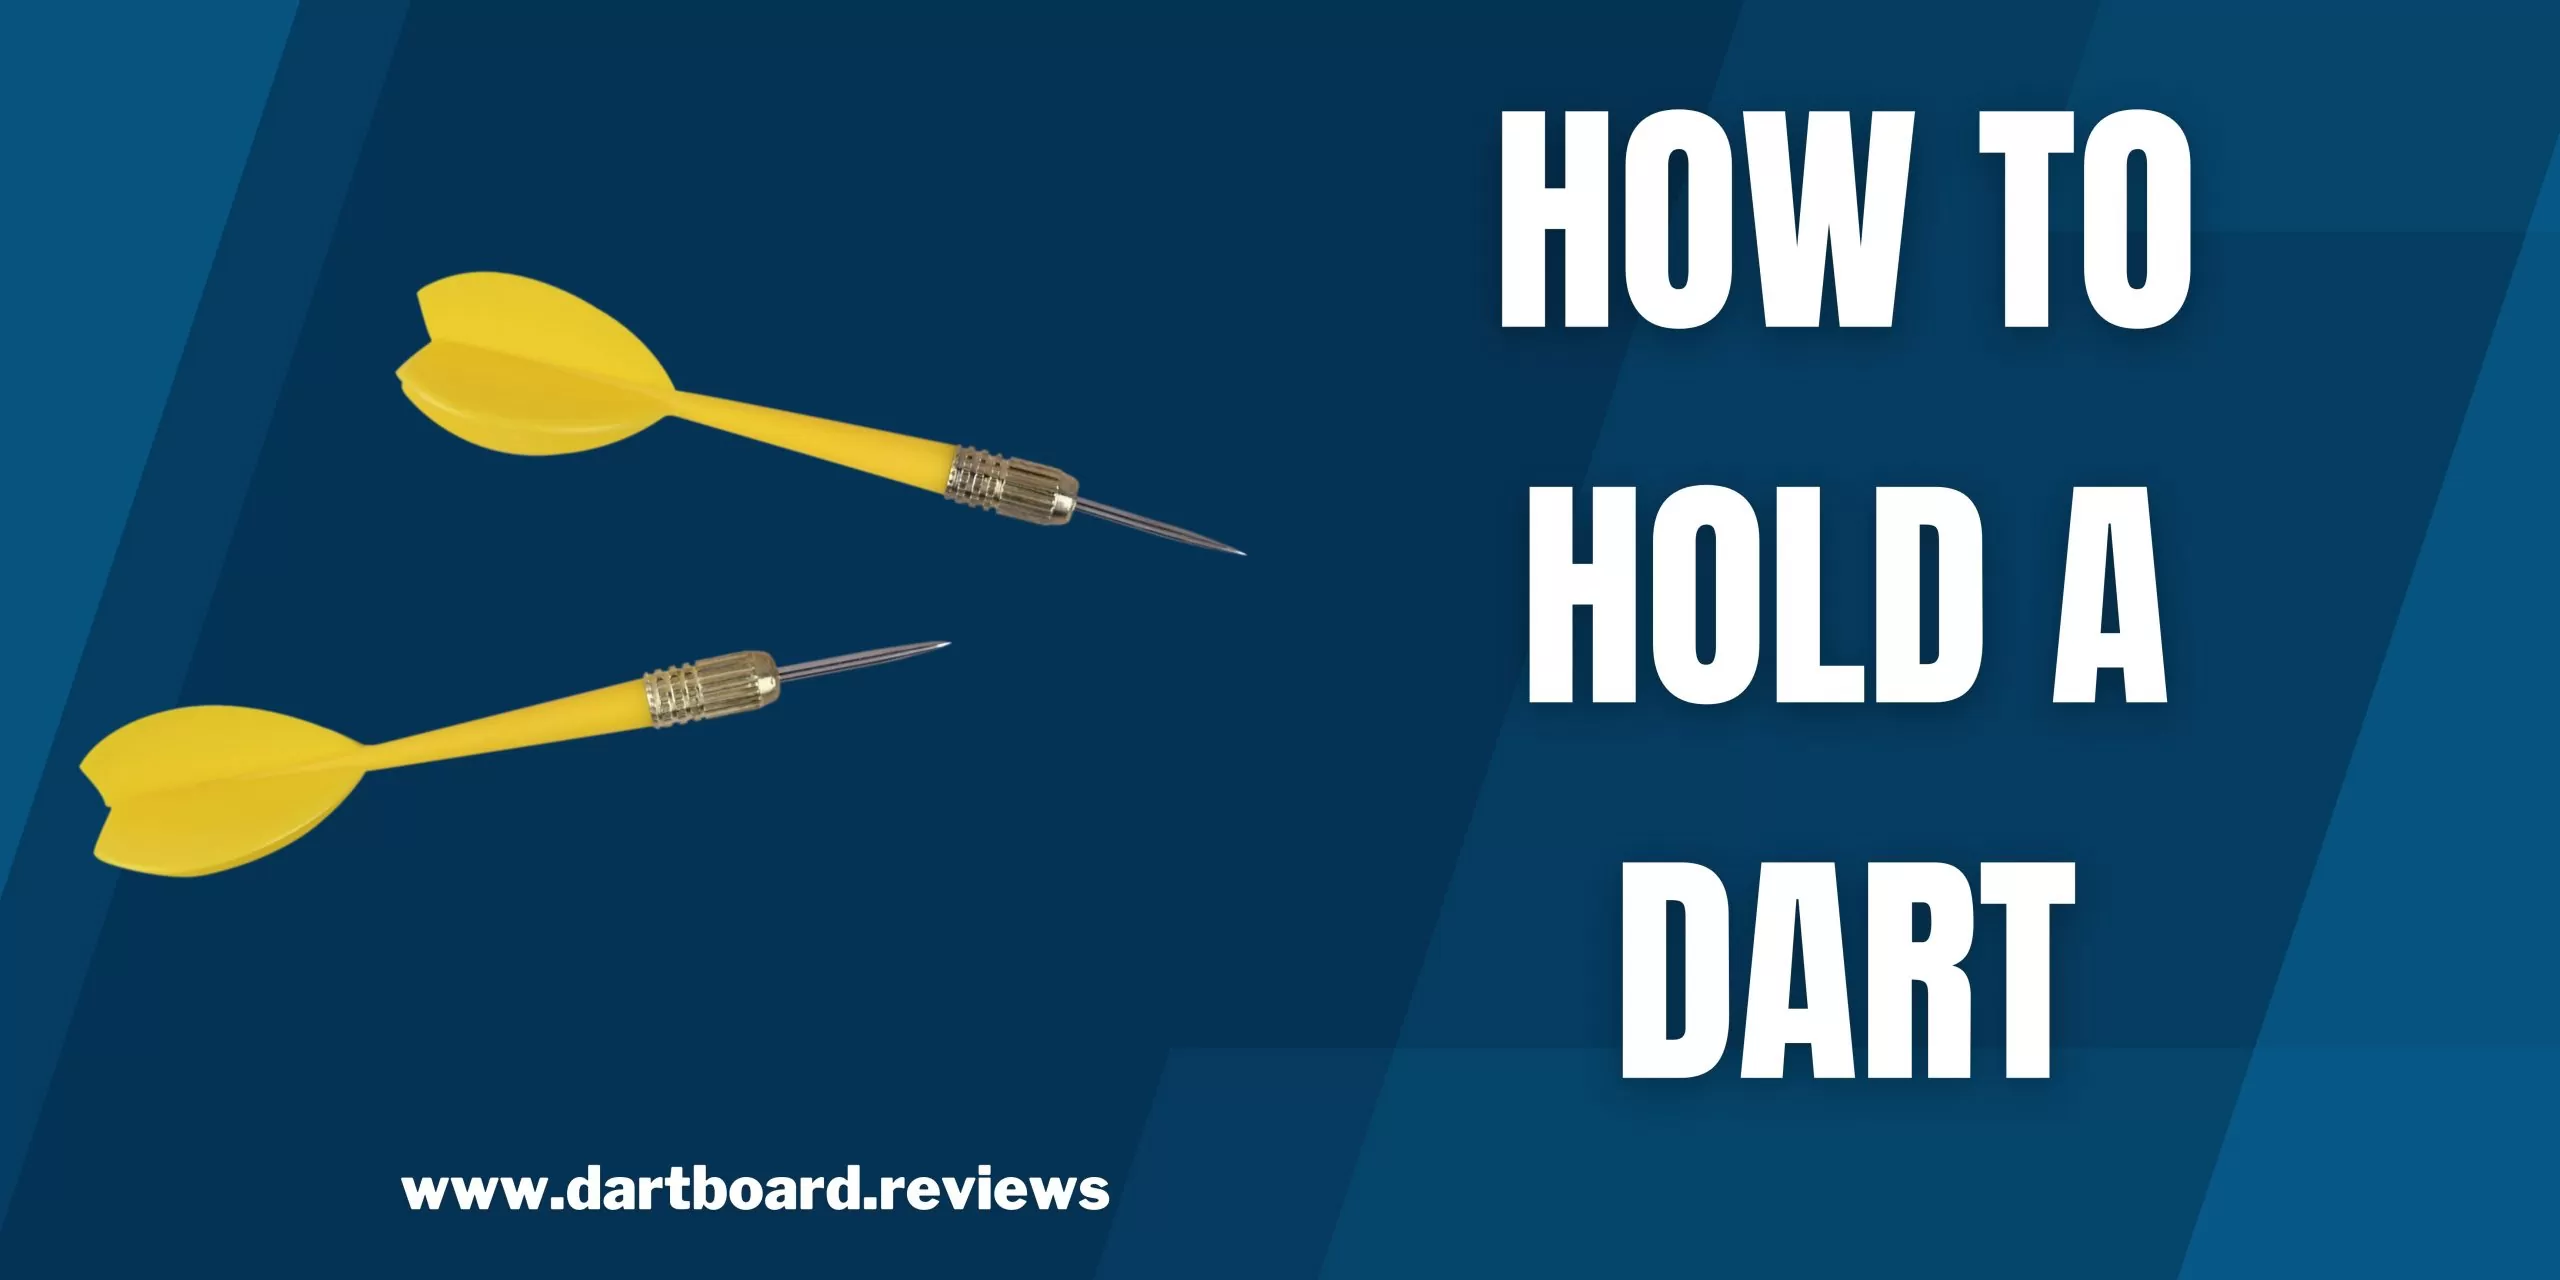 How To Hold A Dart